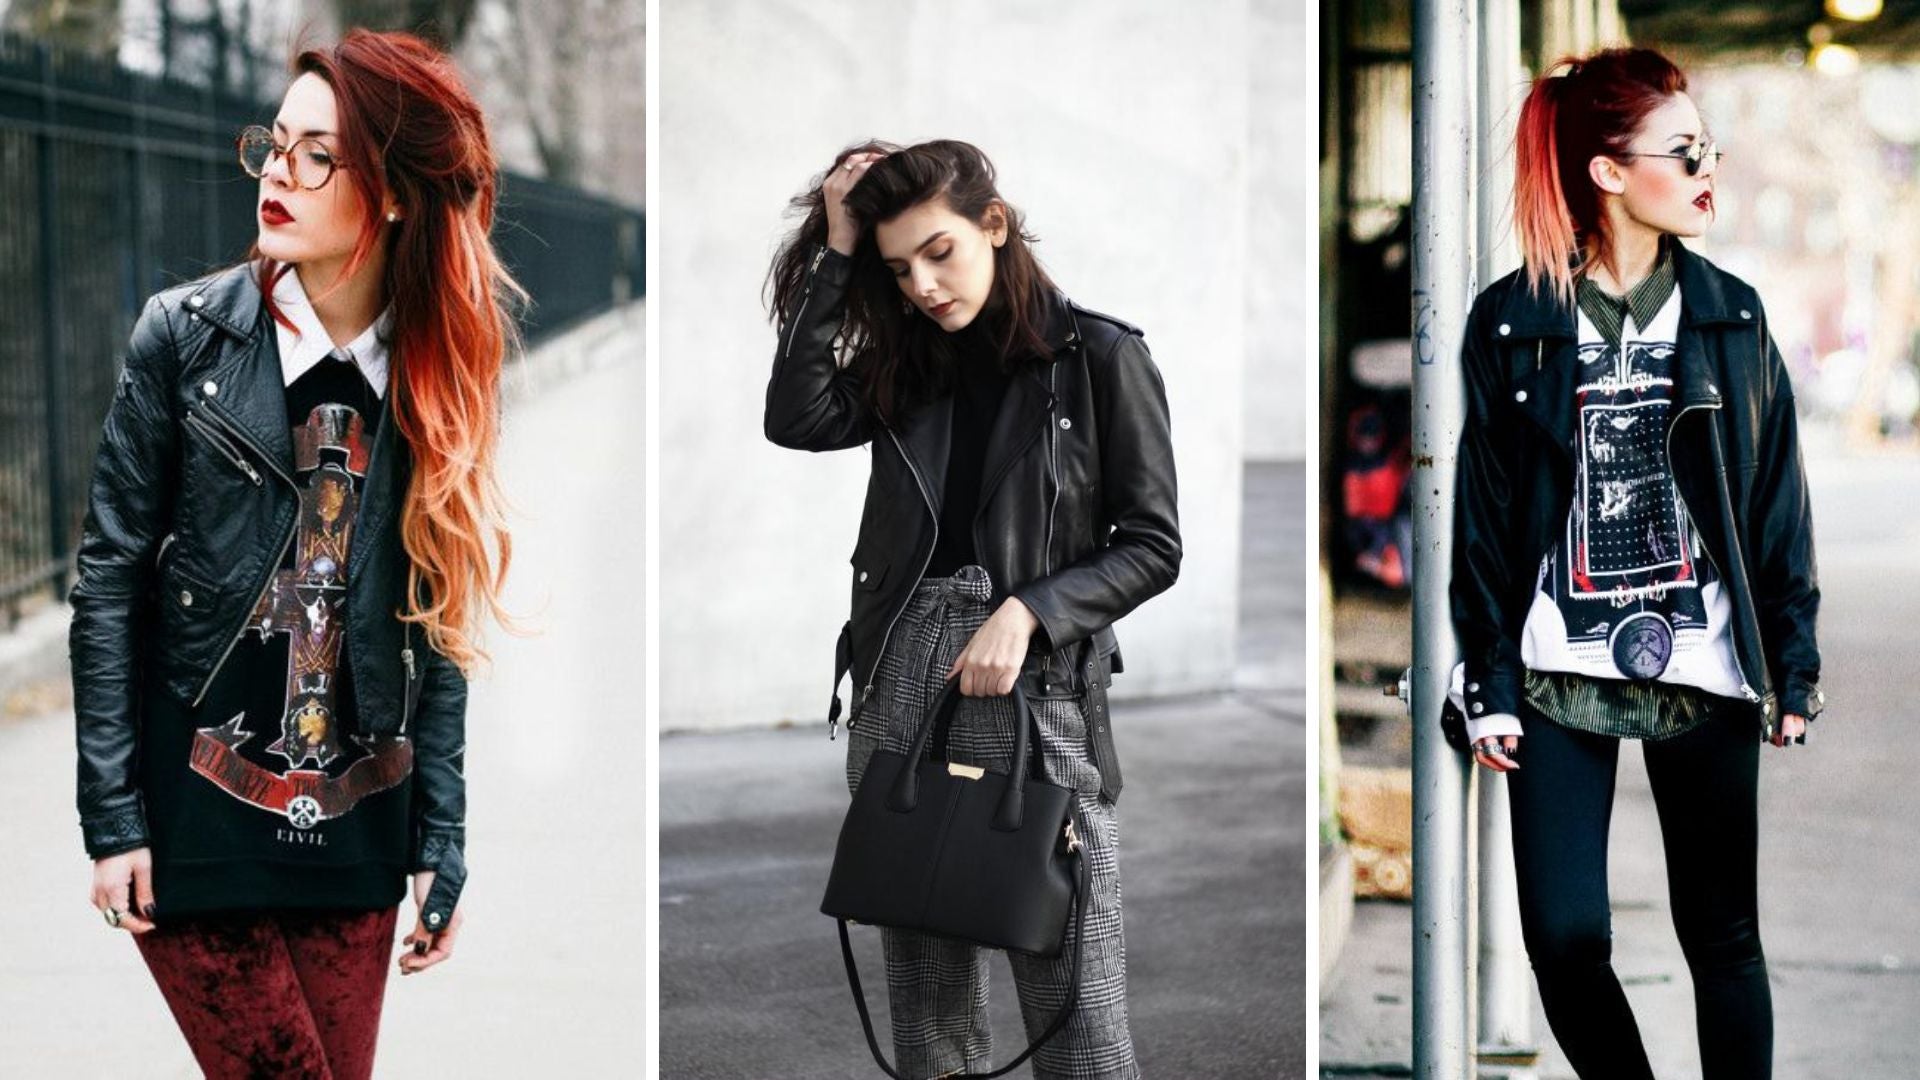 Winter Punk Layering Tips For A Warm And Edgy Look